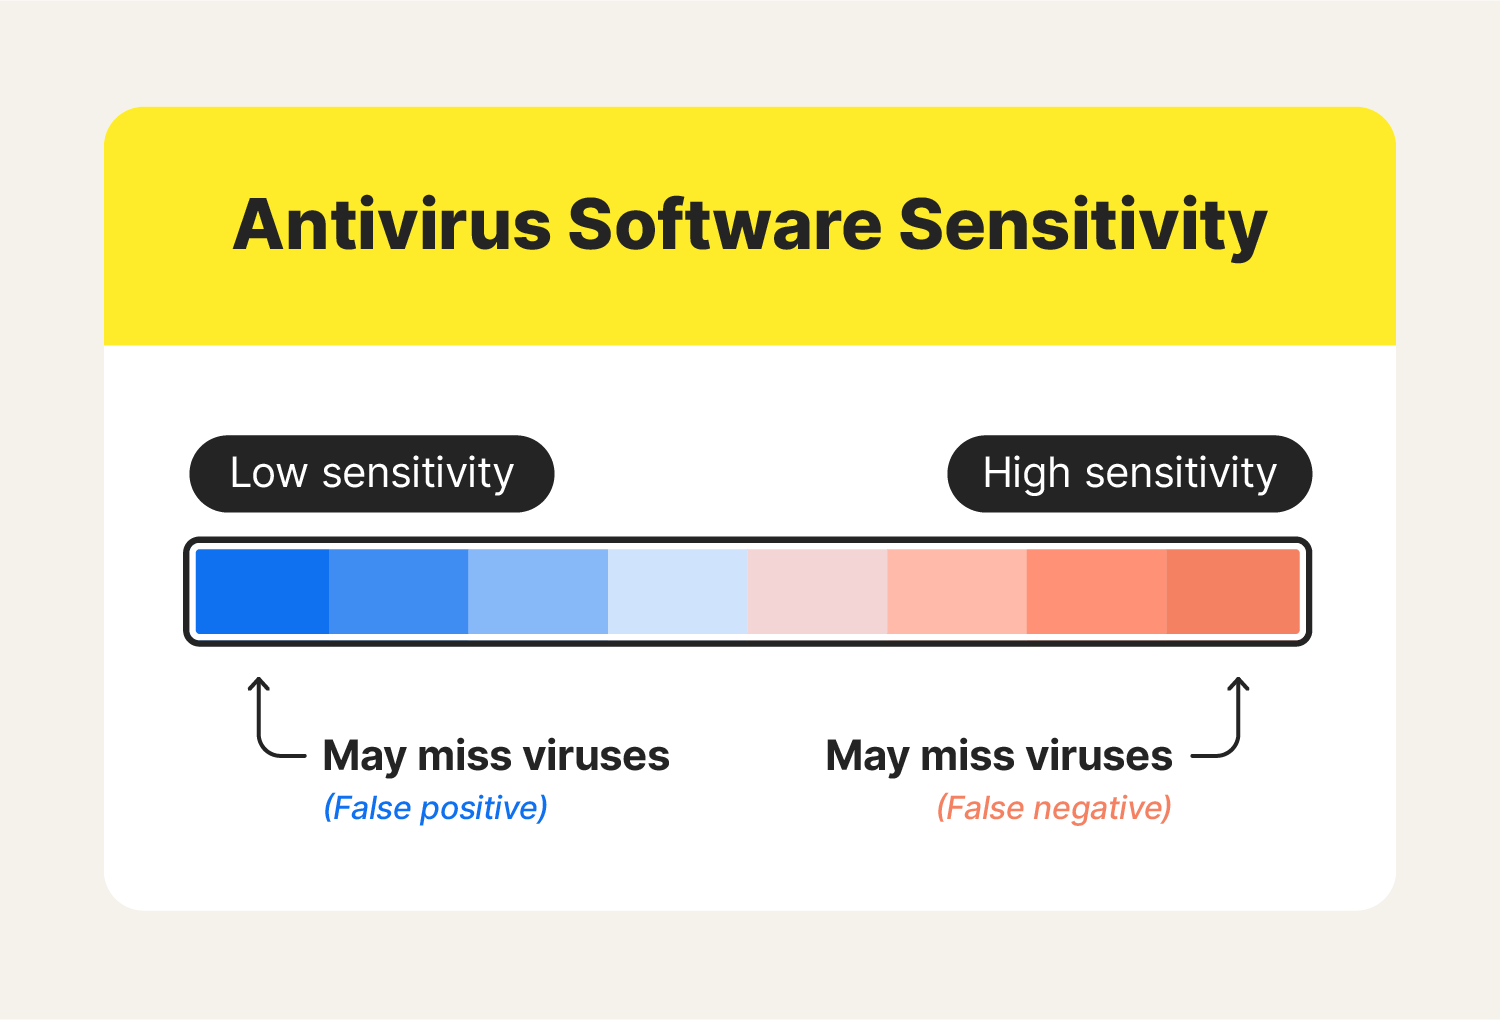 A visual of Antivirus Software Sensitivity with a spectrum going from blue (left) to red (right) with blue labeled “Low sensitivity” and red labeled “High sensitivity.”